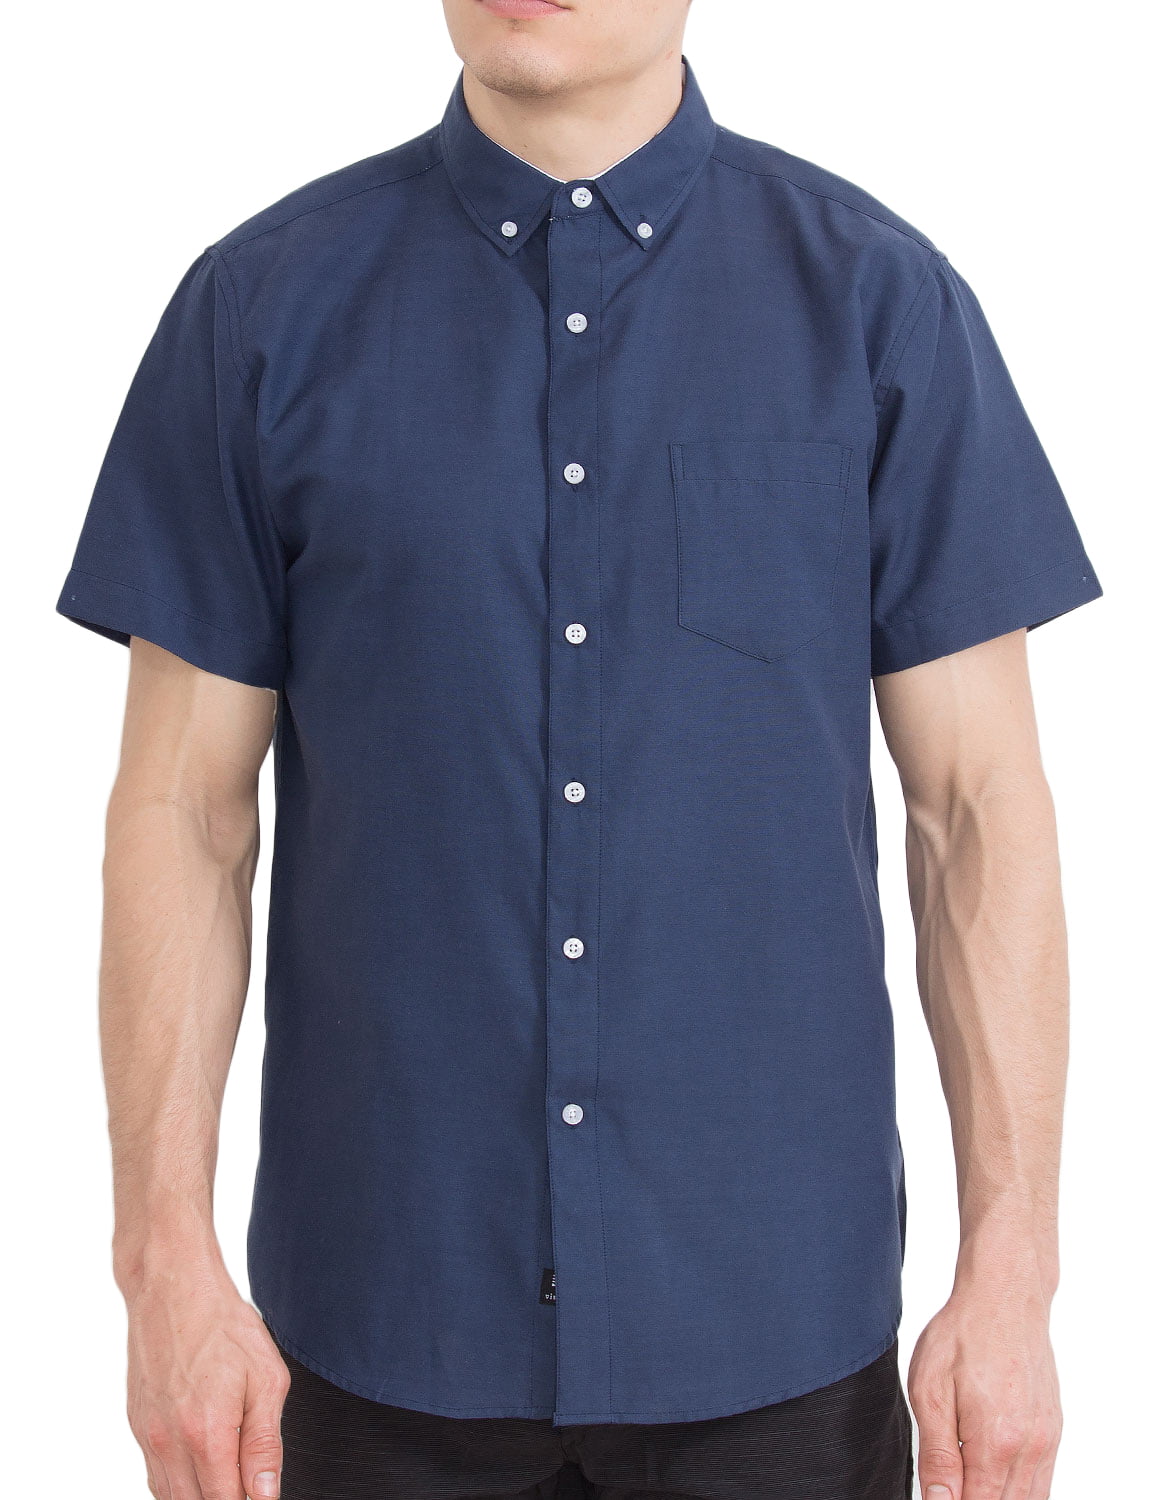 Visive - Visive Mens Short Sleeve Casual Solid Oxford Collared Button Down Up Shirts Navy 3XL